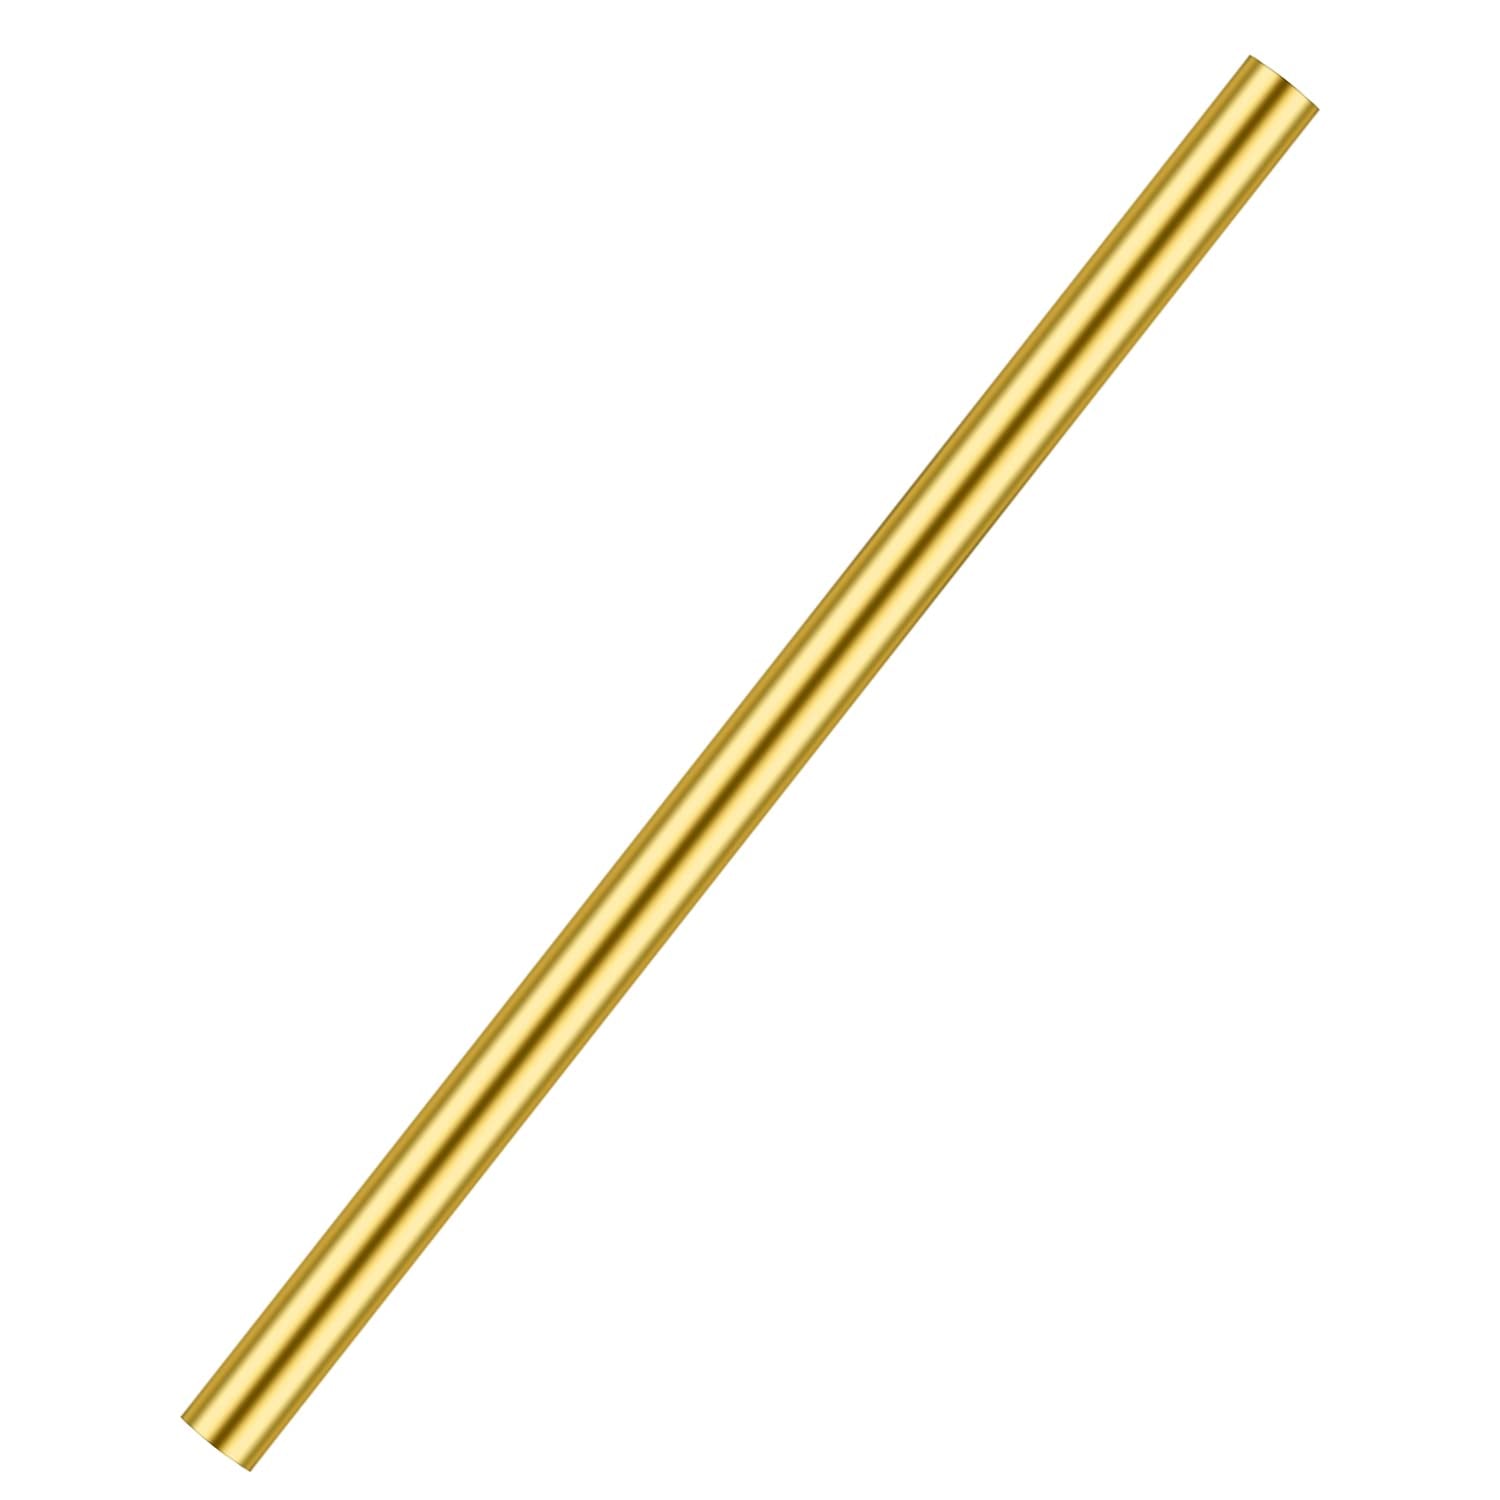 20 Pieces 12 Inches 3/32 Inch/2.5Mm Brass round Rods, Favordrory Brass Rods Lathe Bar Stock, 3/32 Inch/2.5Mm in Diameter 12 Inches in Length